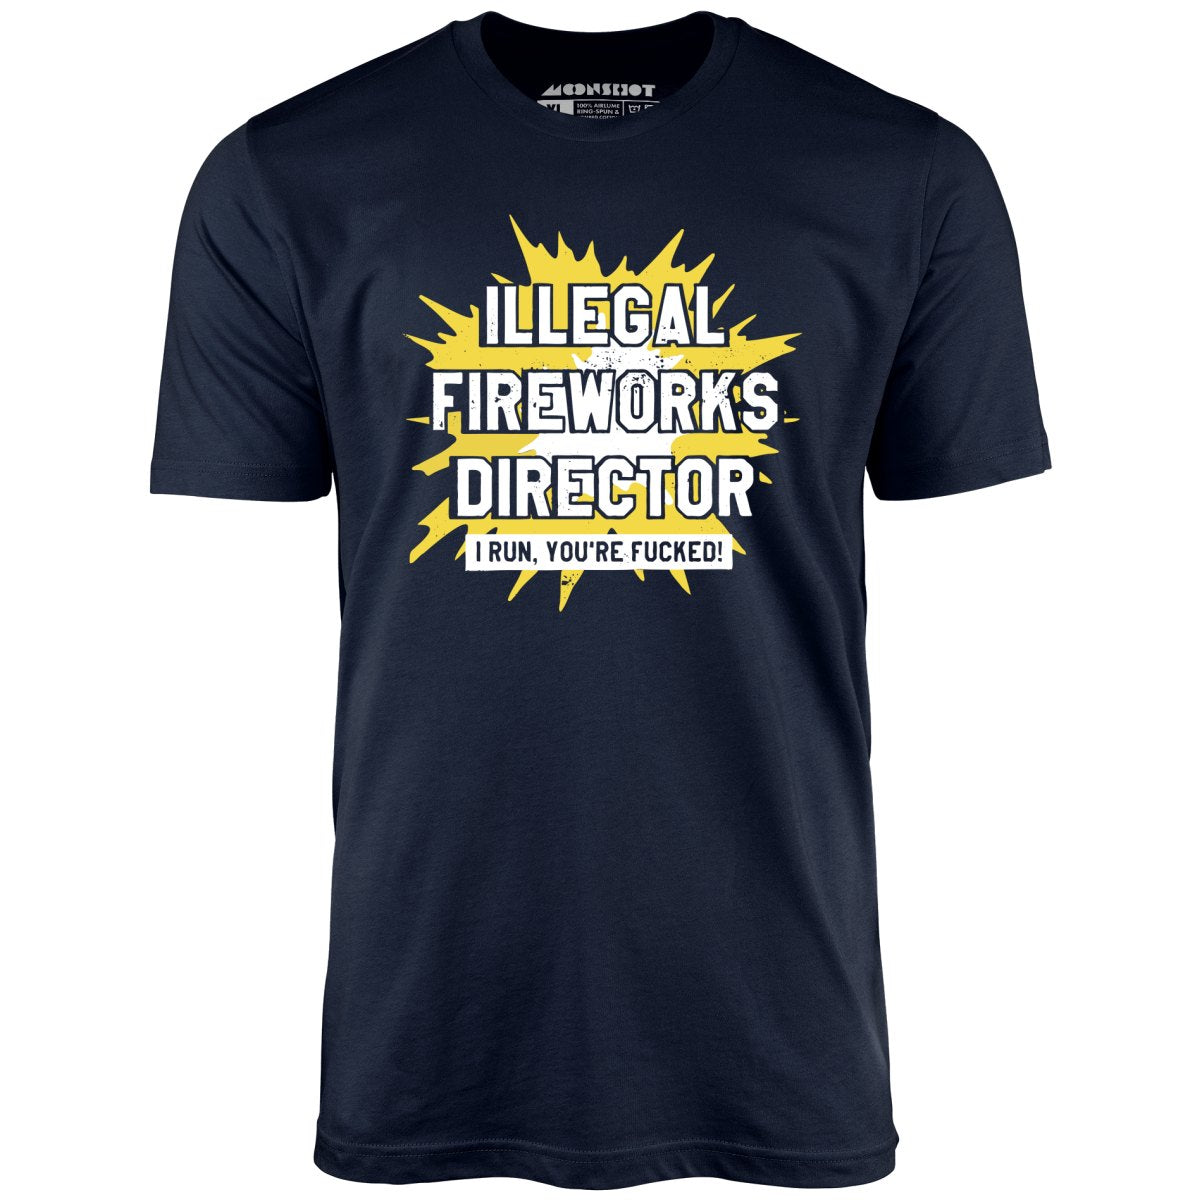 Illegal Fireworks Director I Run, You're Fucked - Unisex T-Shirt